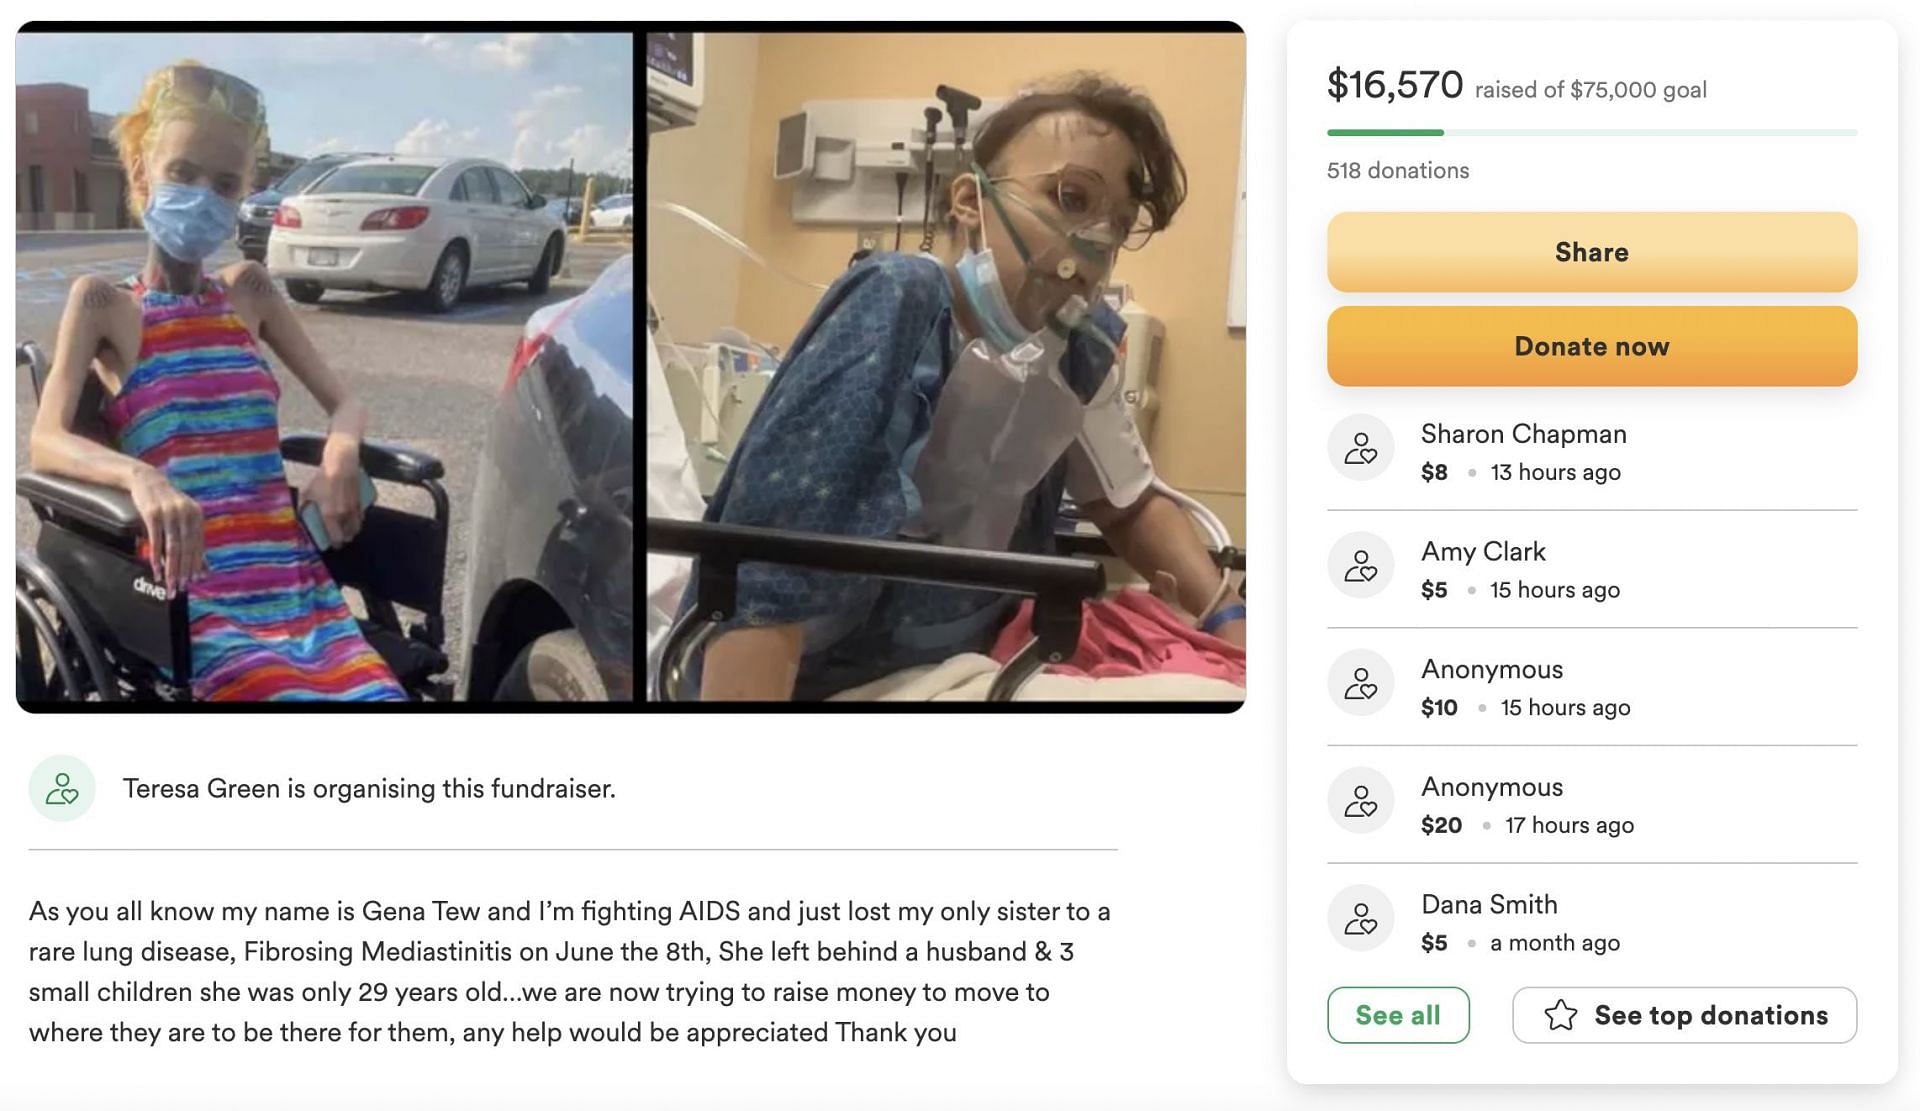 Gena Tew started a fundraiser for herself so that she is able to stay close to her family, for her better recovery. (Image via GoFundMe)